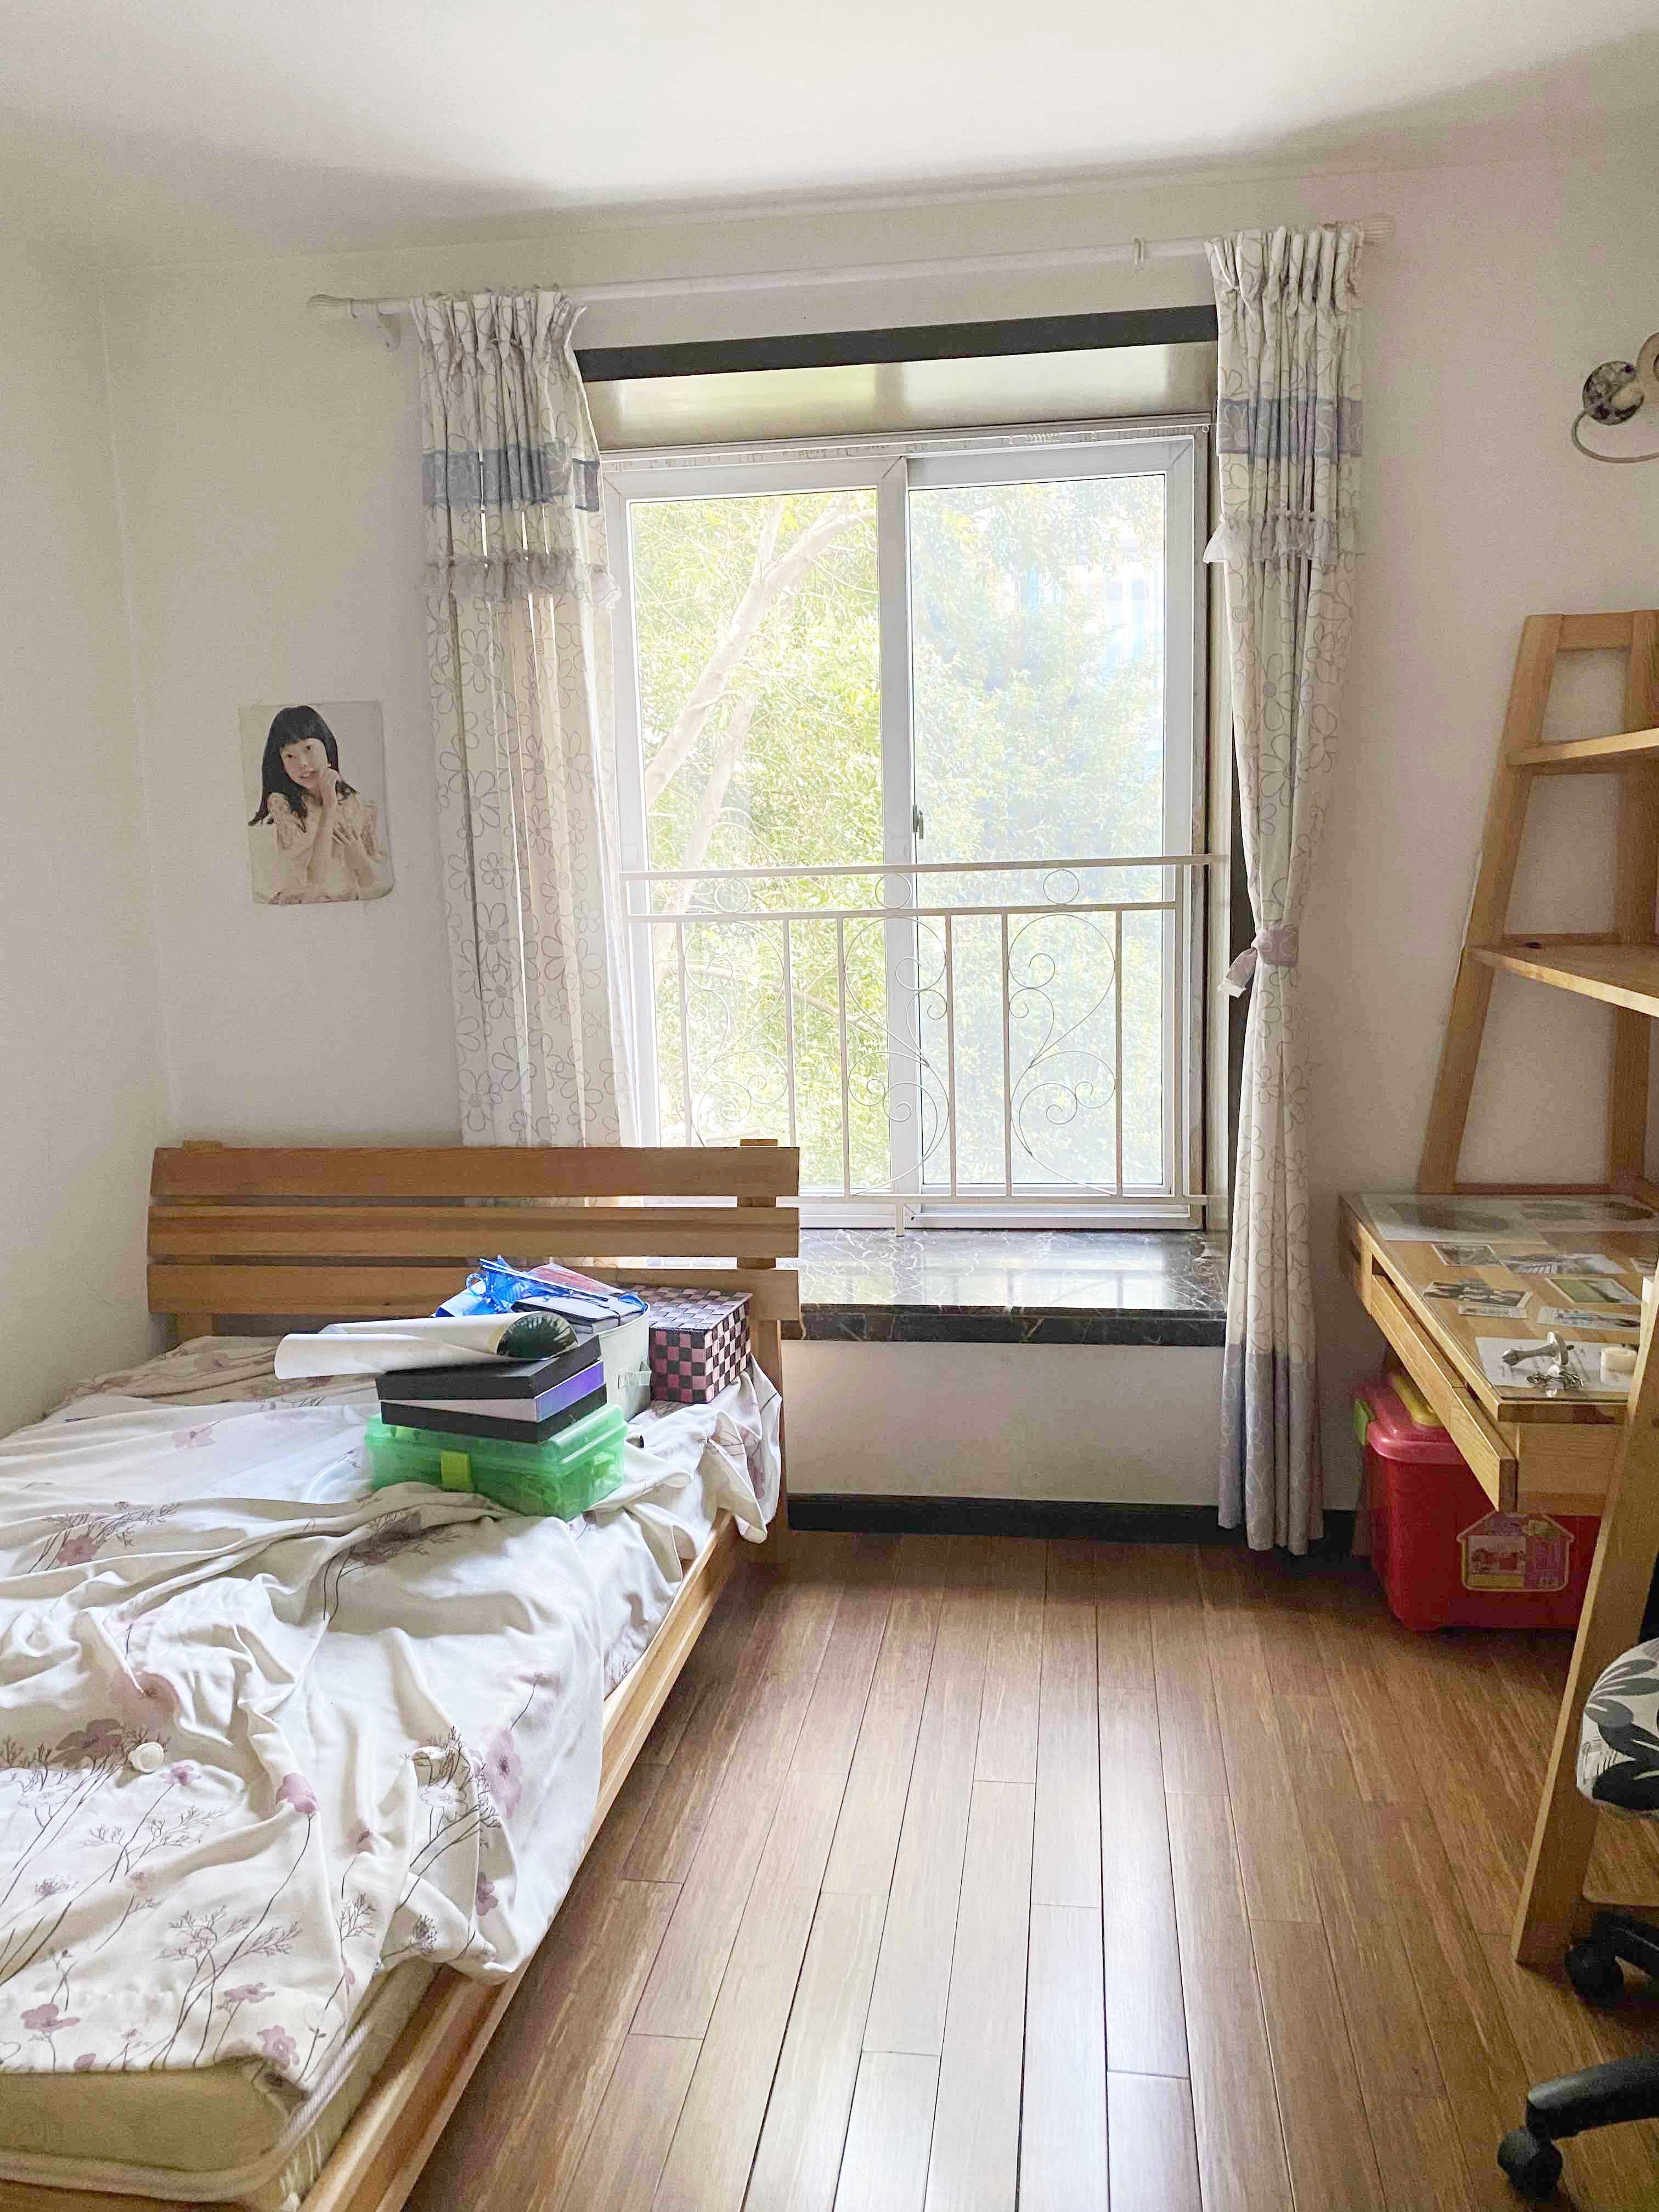 Bedroom in student apartment in Chengdu, China.